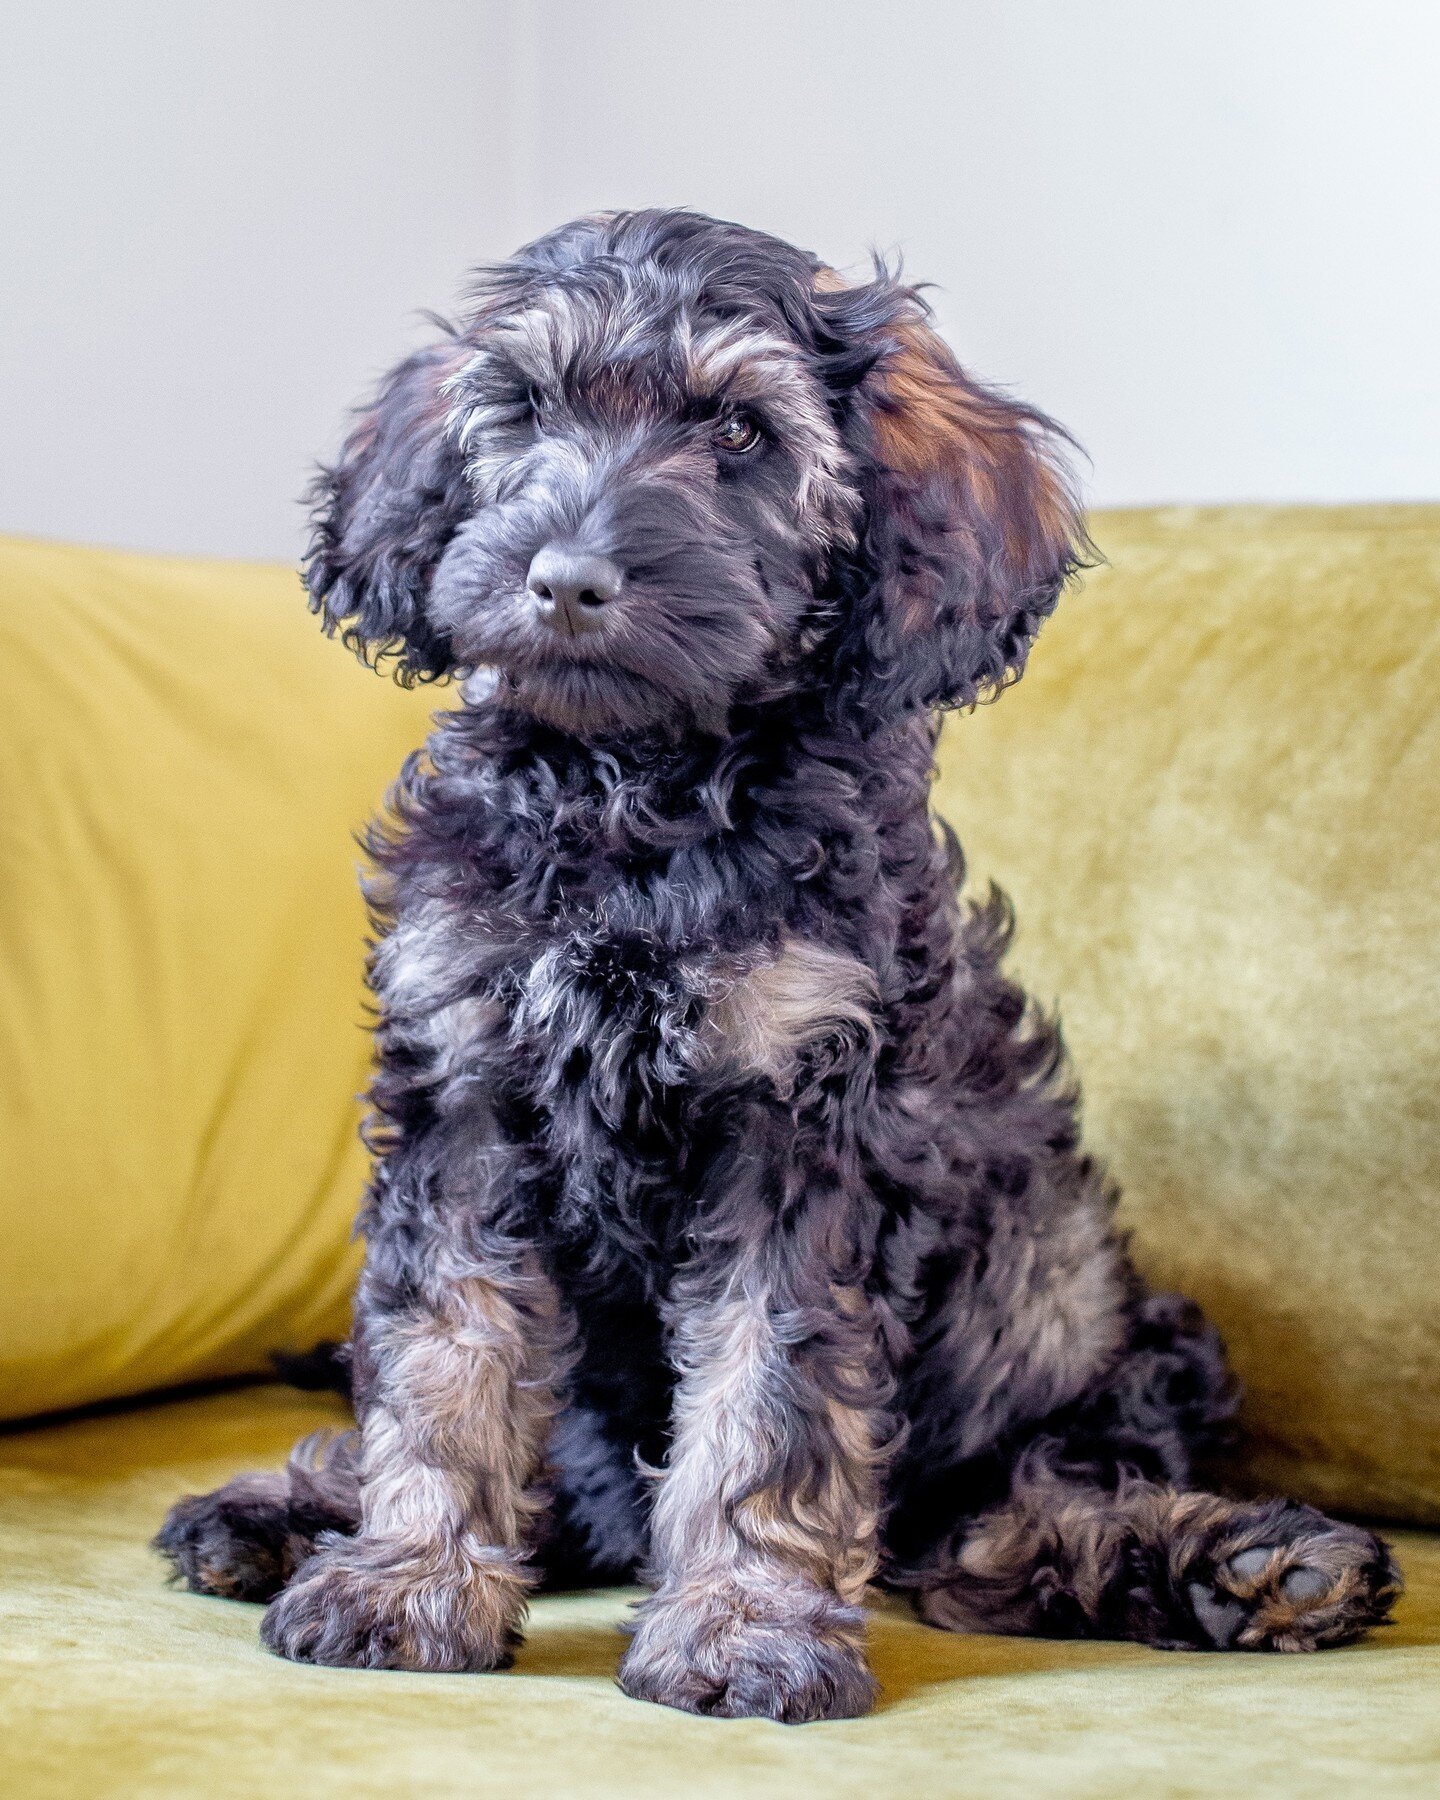 I miss this amazing boy, he is one of Pocket's pups that went home in June. ⁠
Isn't he handsome?⁠
⁠
⁠
⁠
⁠
#greatdaylabradoodles⁠
#labradoodlepuppies⁠
#lolcanine⁠
#australianlabradoodle⁠
#labradoodles⁠
#merlelabradoodle⁠
#phantomlabradoodles⁠
#labrado